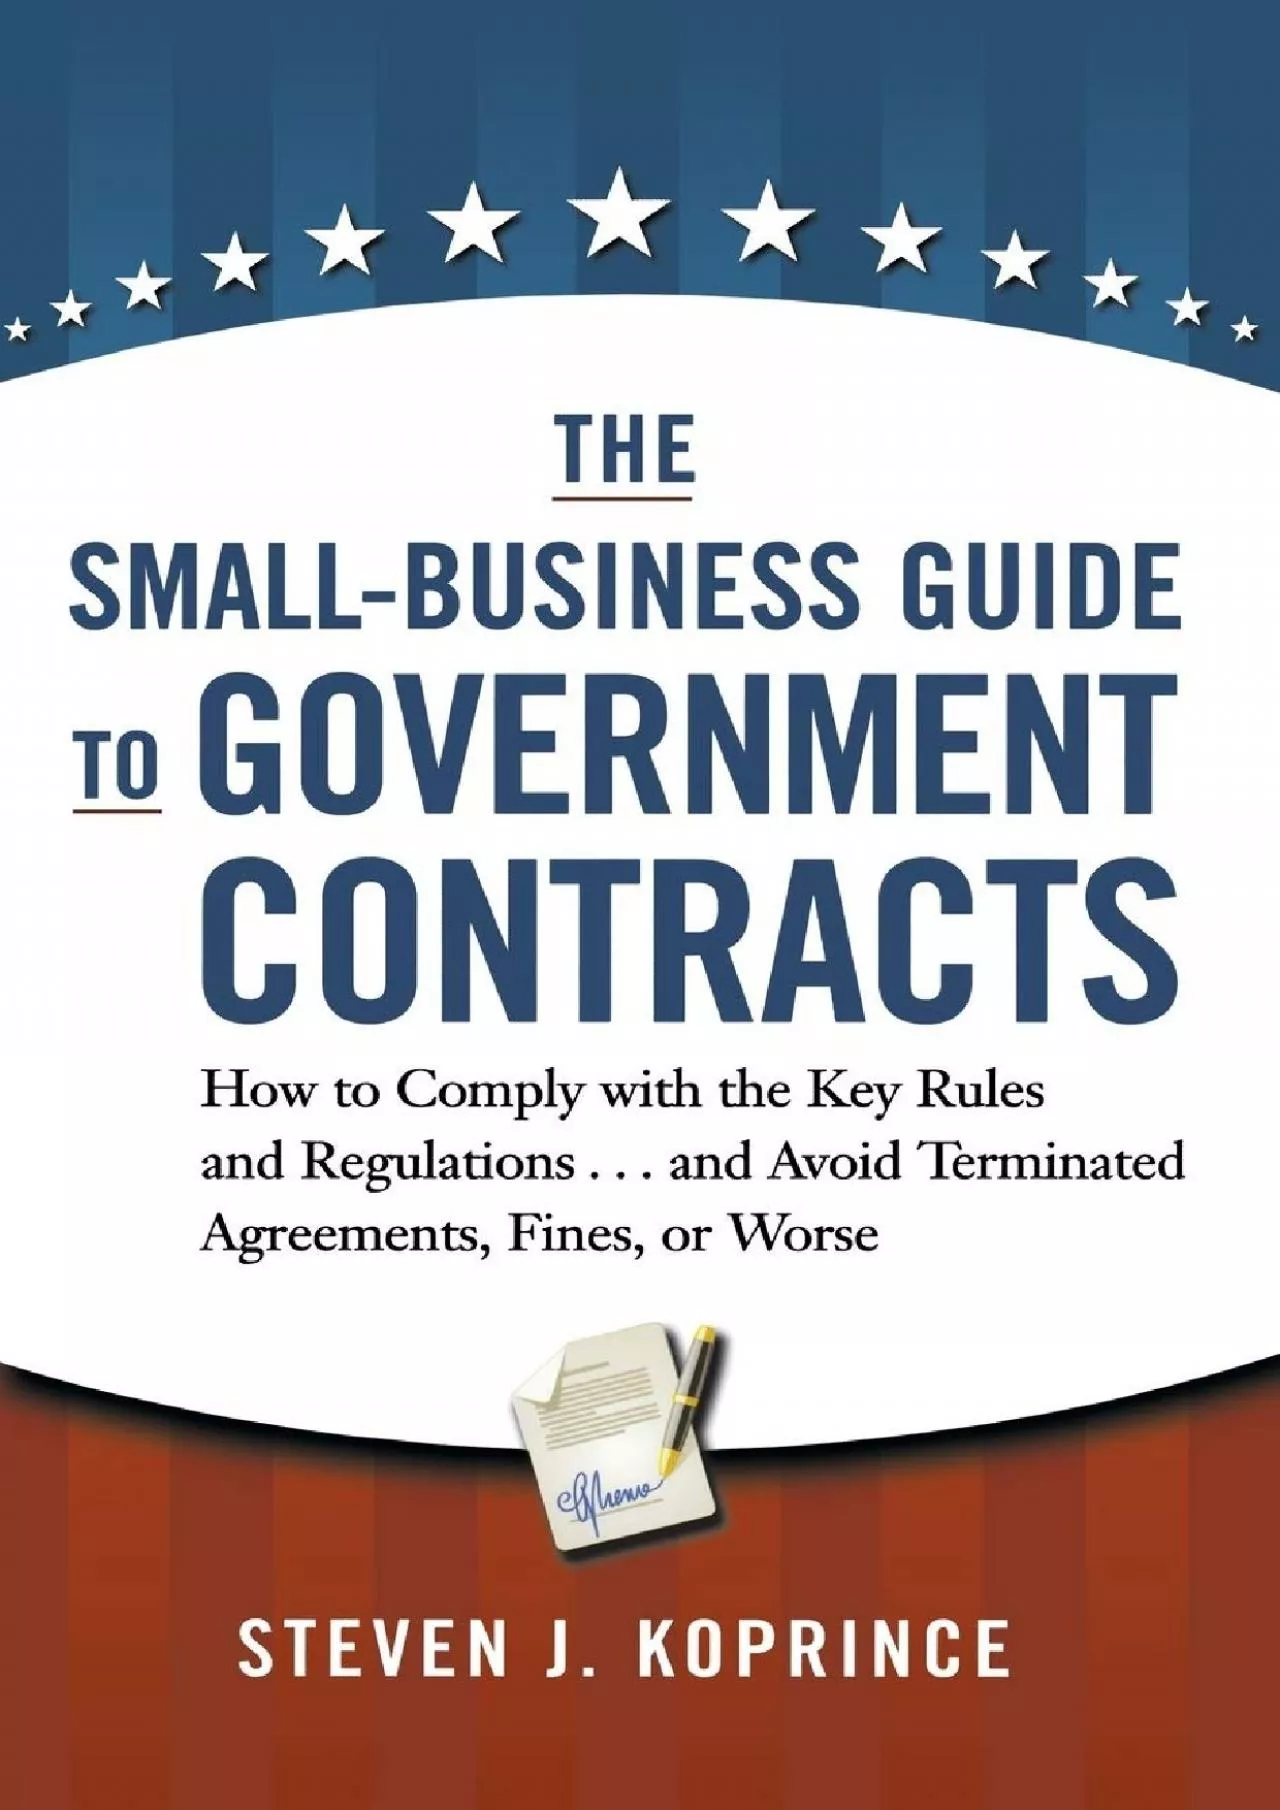 (BOOK)-The Small-Business Guide to Government Contracts: How to Comply with the Key Rules